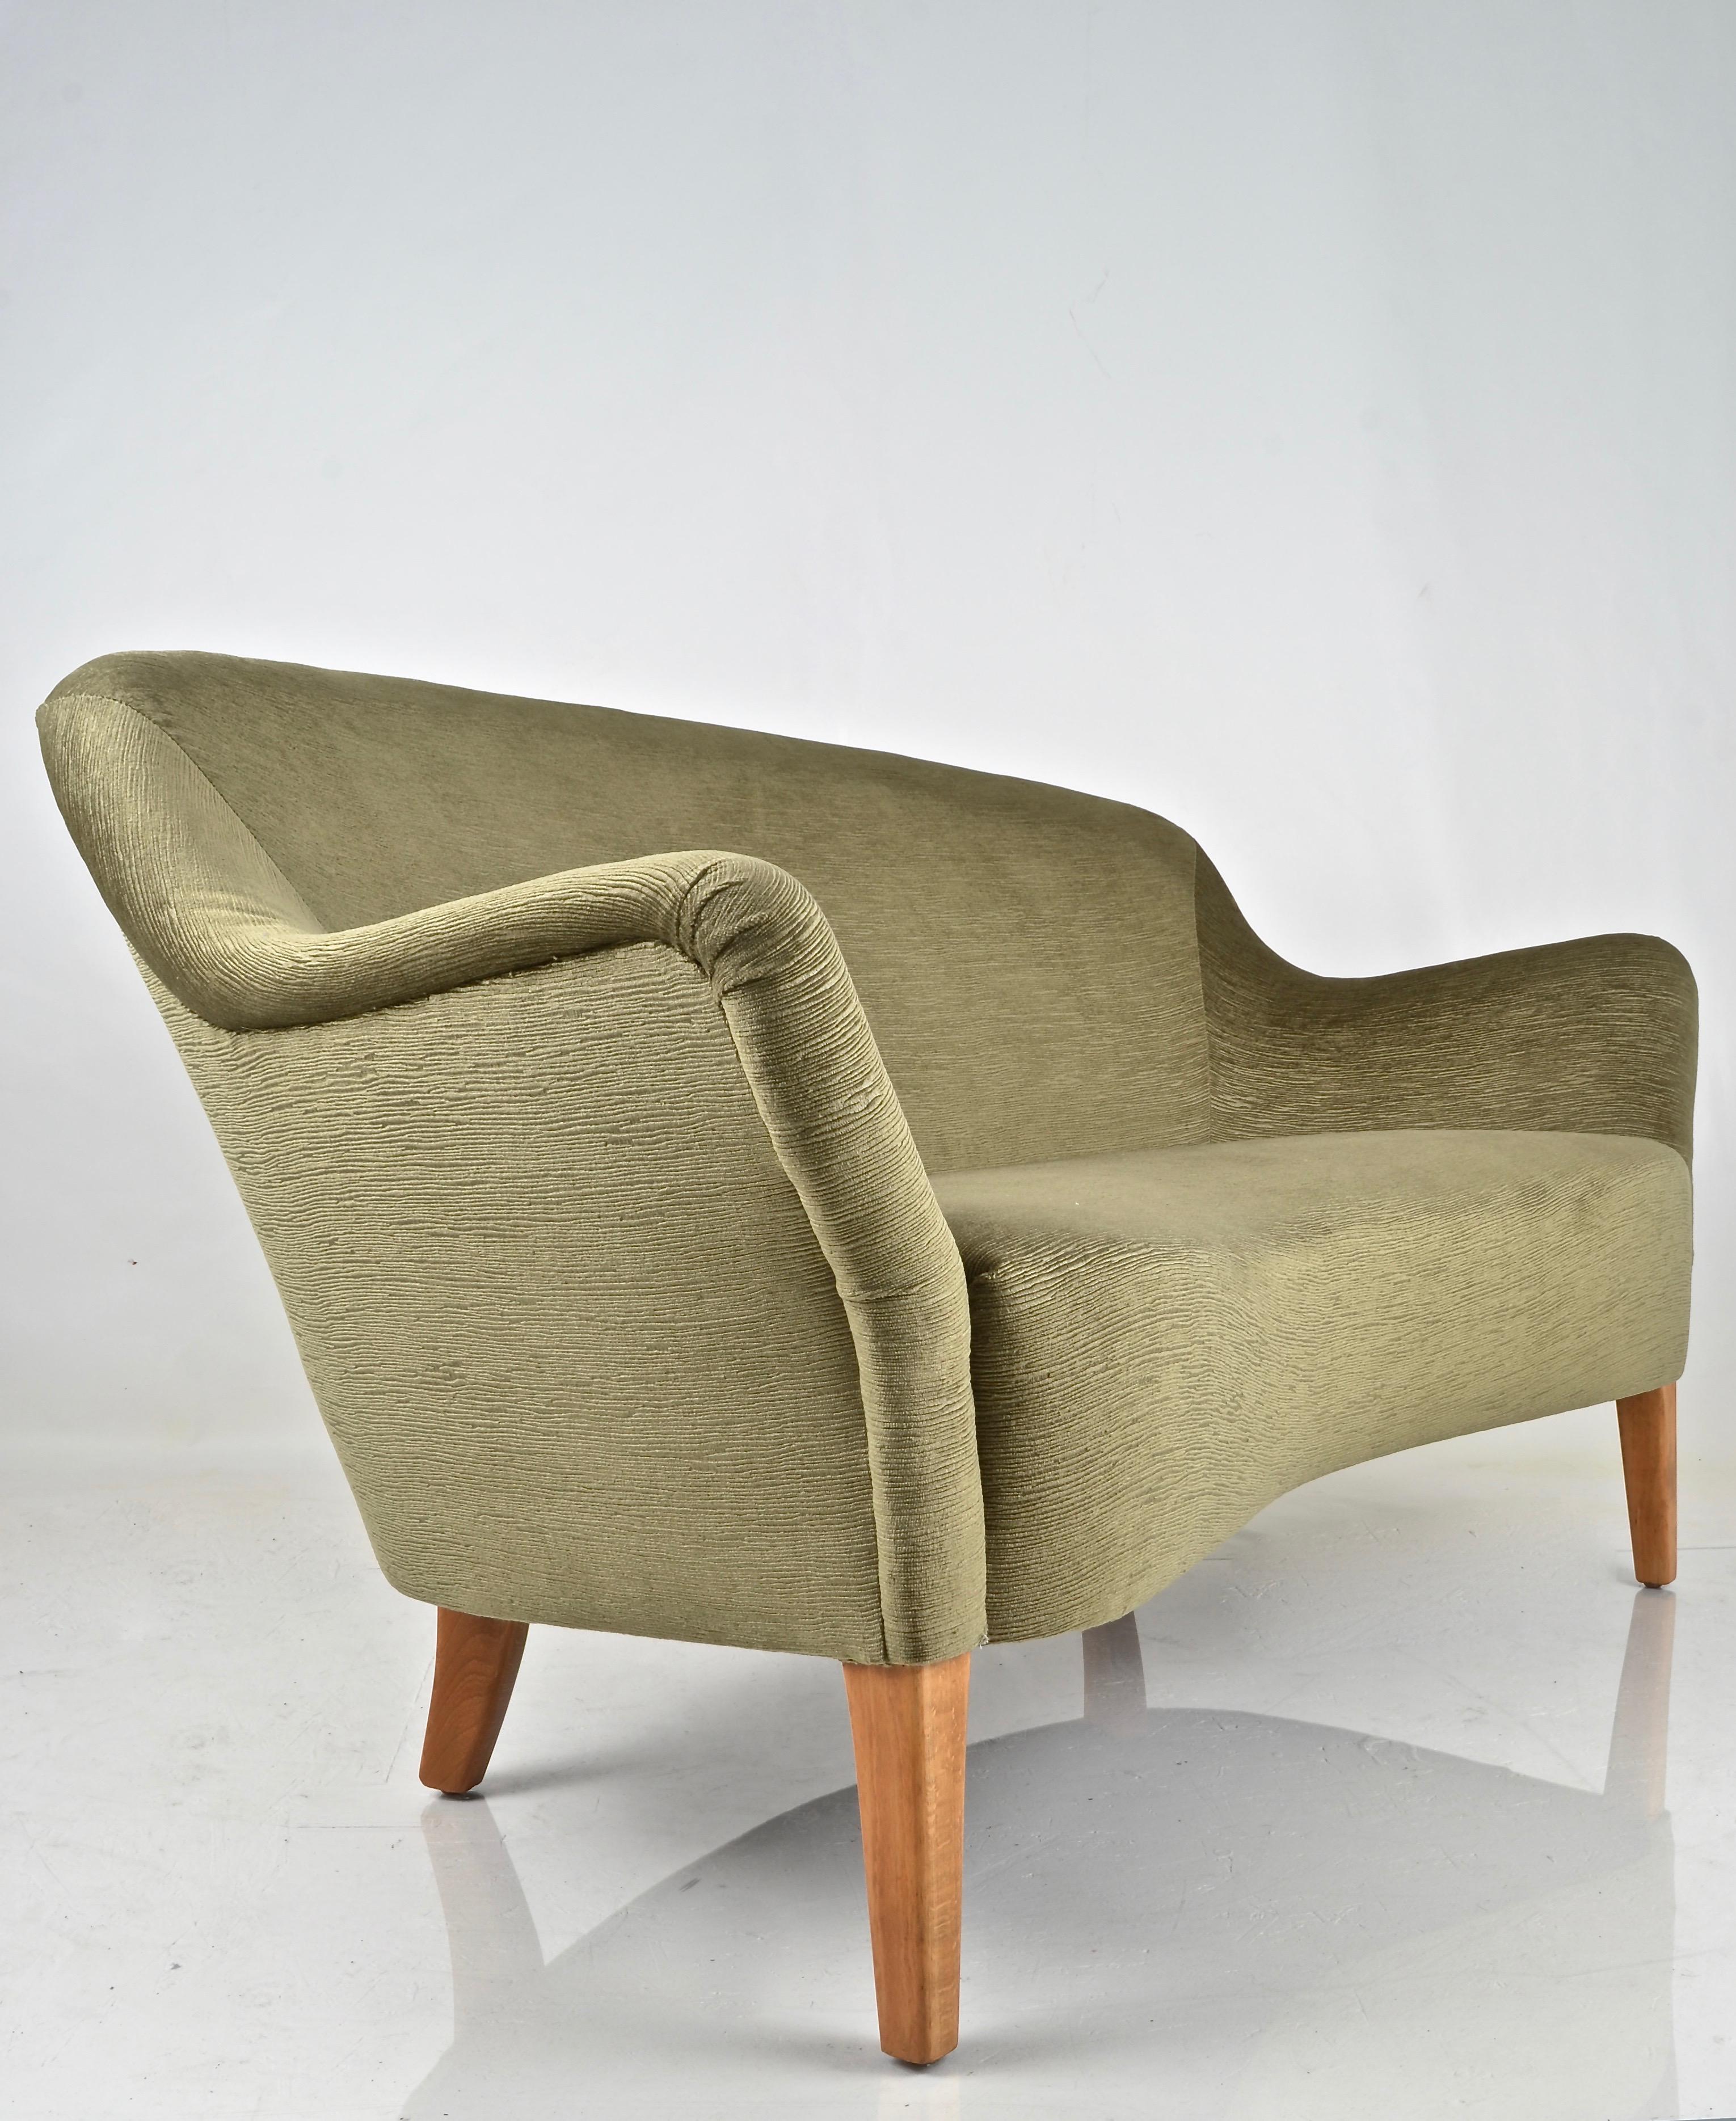 Great form and quality construction in this curvy, modern loveseat. Note kidney shaped seat. Newly upholstered in a stripy cut-velvet in mossy green. Tight back and seat. A nice example of early Scandinavian Modern Design.